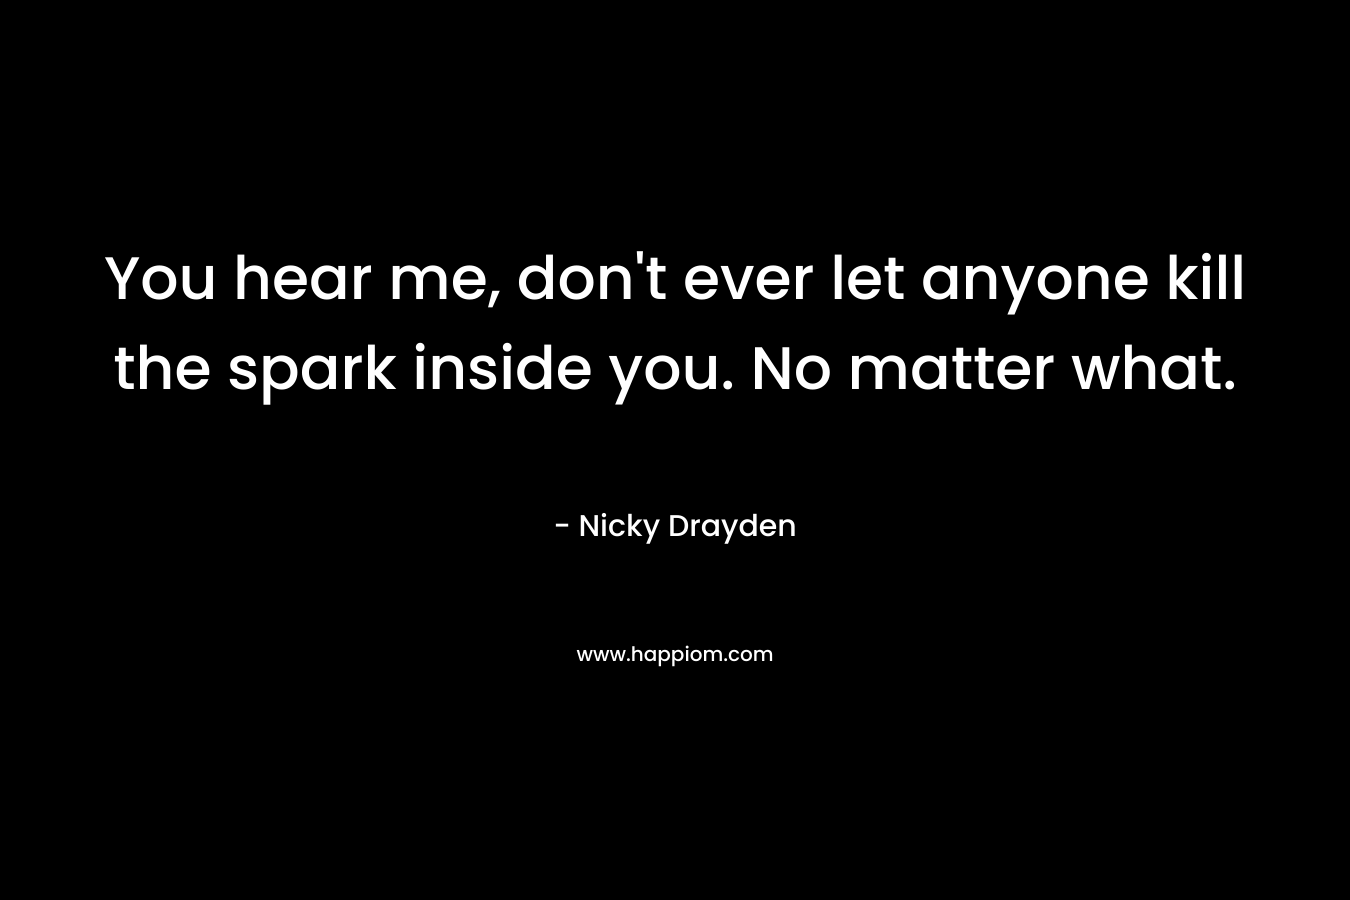 You hear me, don't ever let anyone kill the spark inside you. No matter what.